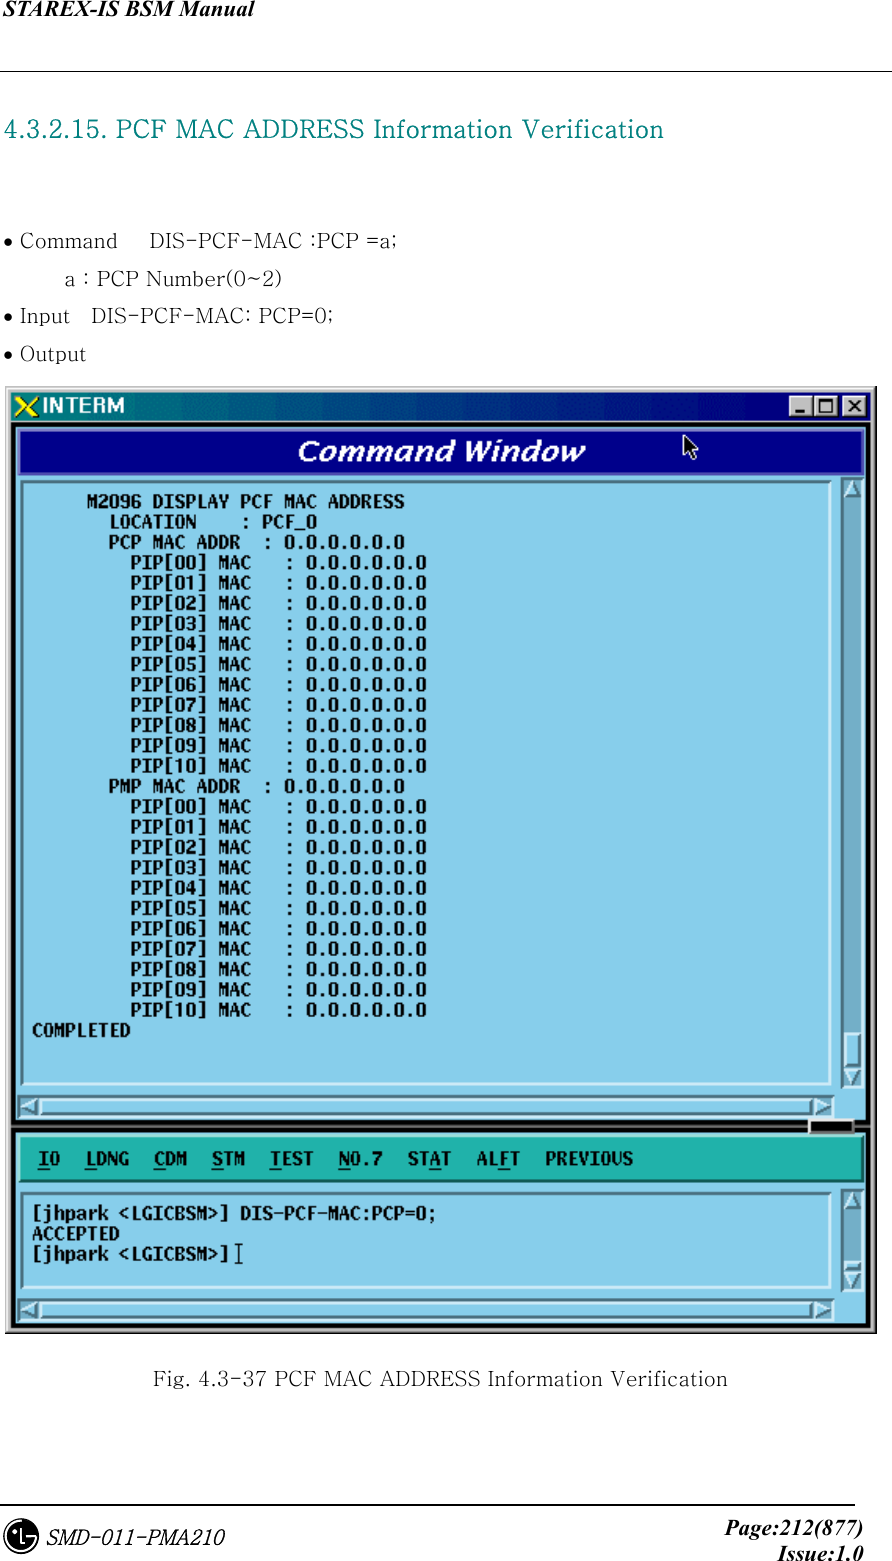 STAREX-IS BSM Manual     Page:212(877)Issue:1.0SMD-011-PMA210  4.3.2.15. PCF MAC ADDRESS Information Verification   • Command   DIS-PCF-MAC :PCP =a; a : PCP Number(0~2) • Input    DIS-PCF-MAC: PCP=0; • Output  Fig. 4.3-37 PCF MAC ADDRESS Information Verification 